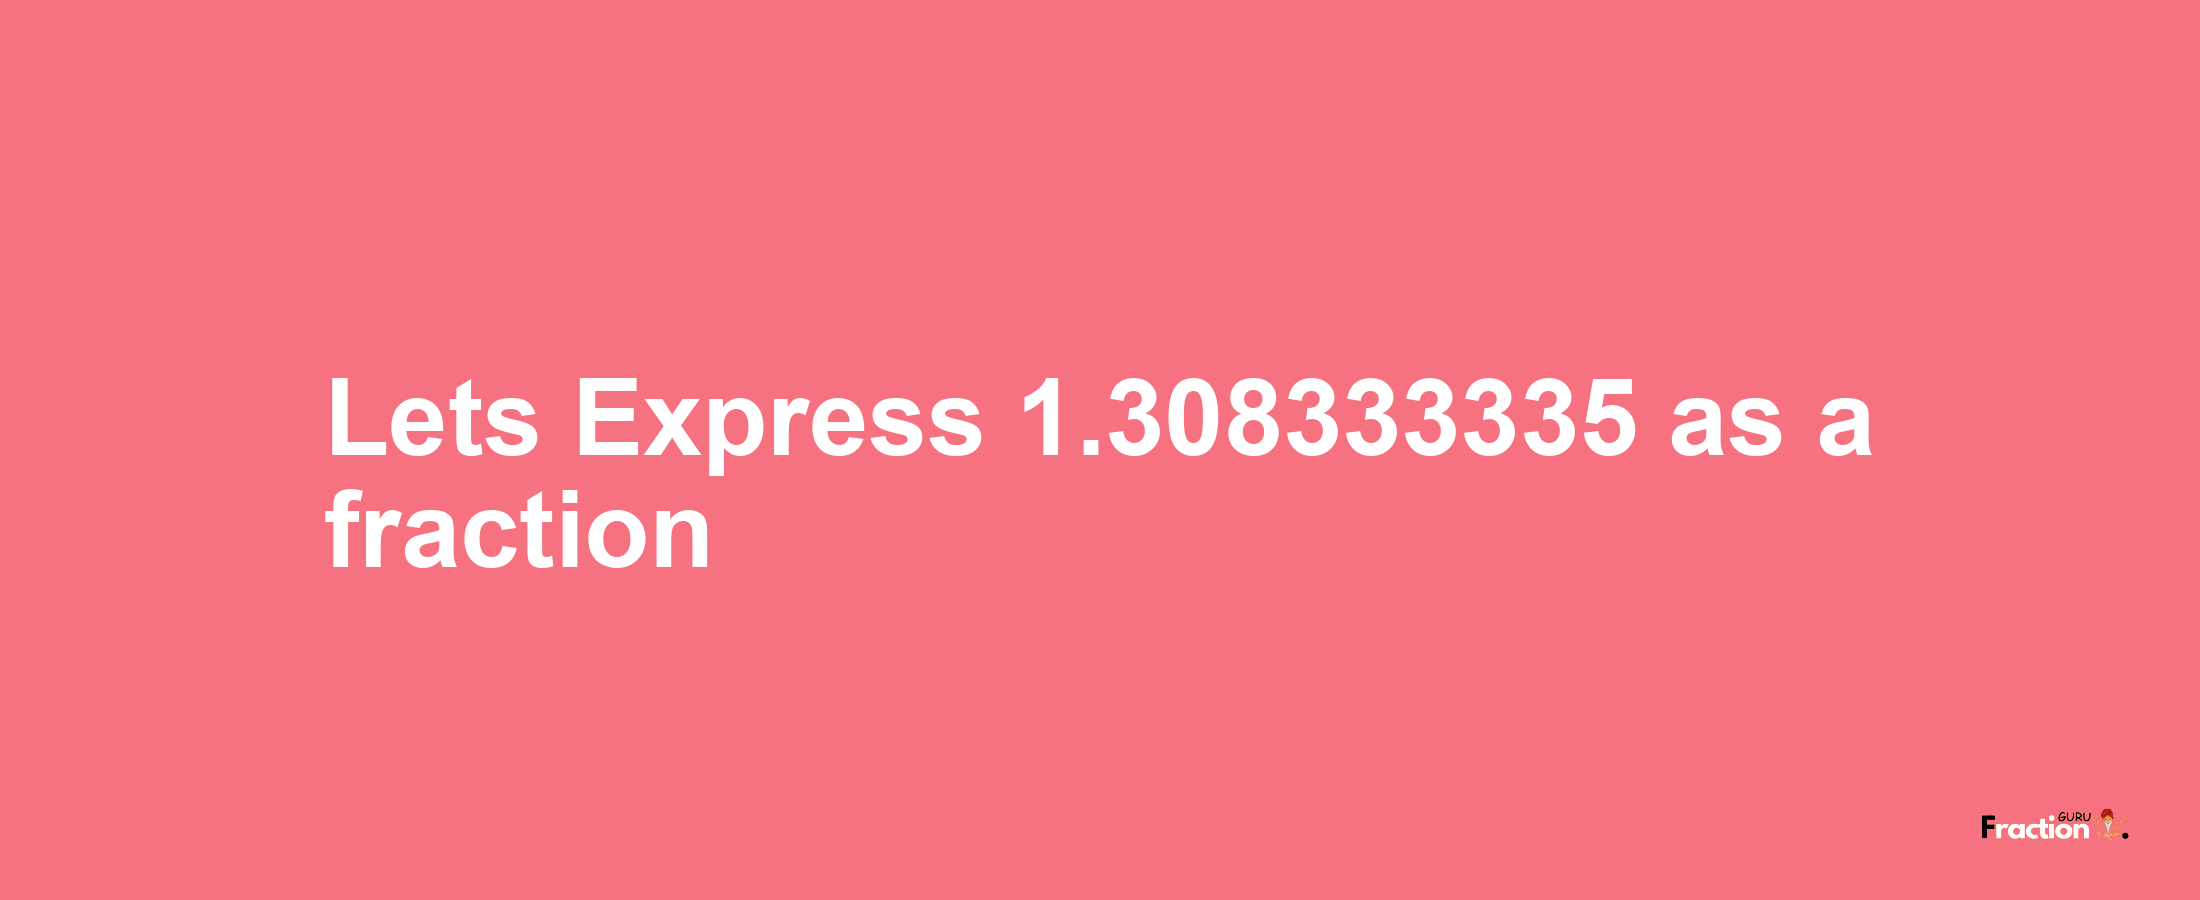 Lets Express 1.308333335 as afraction